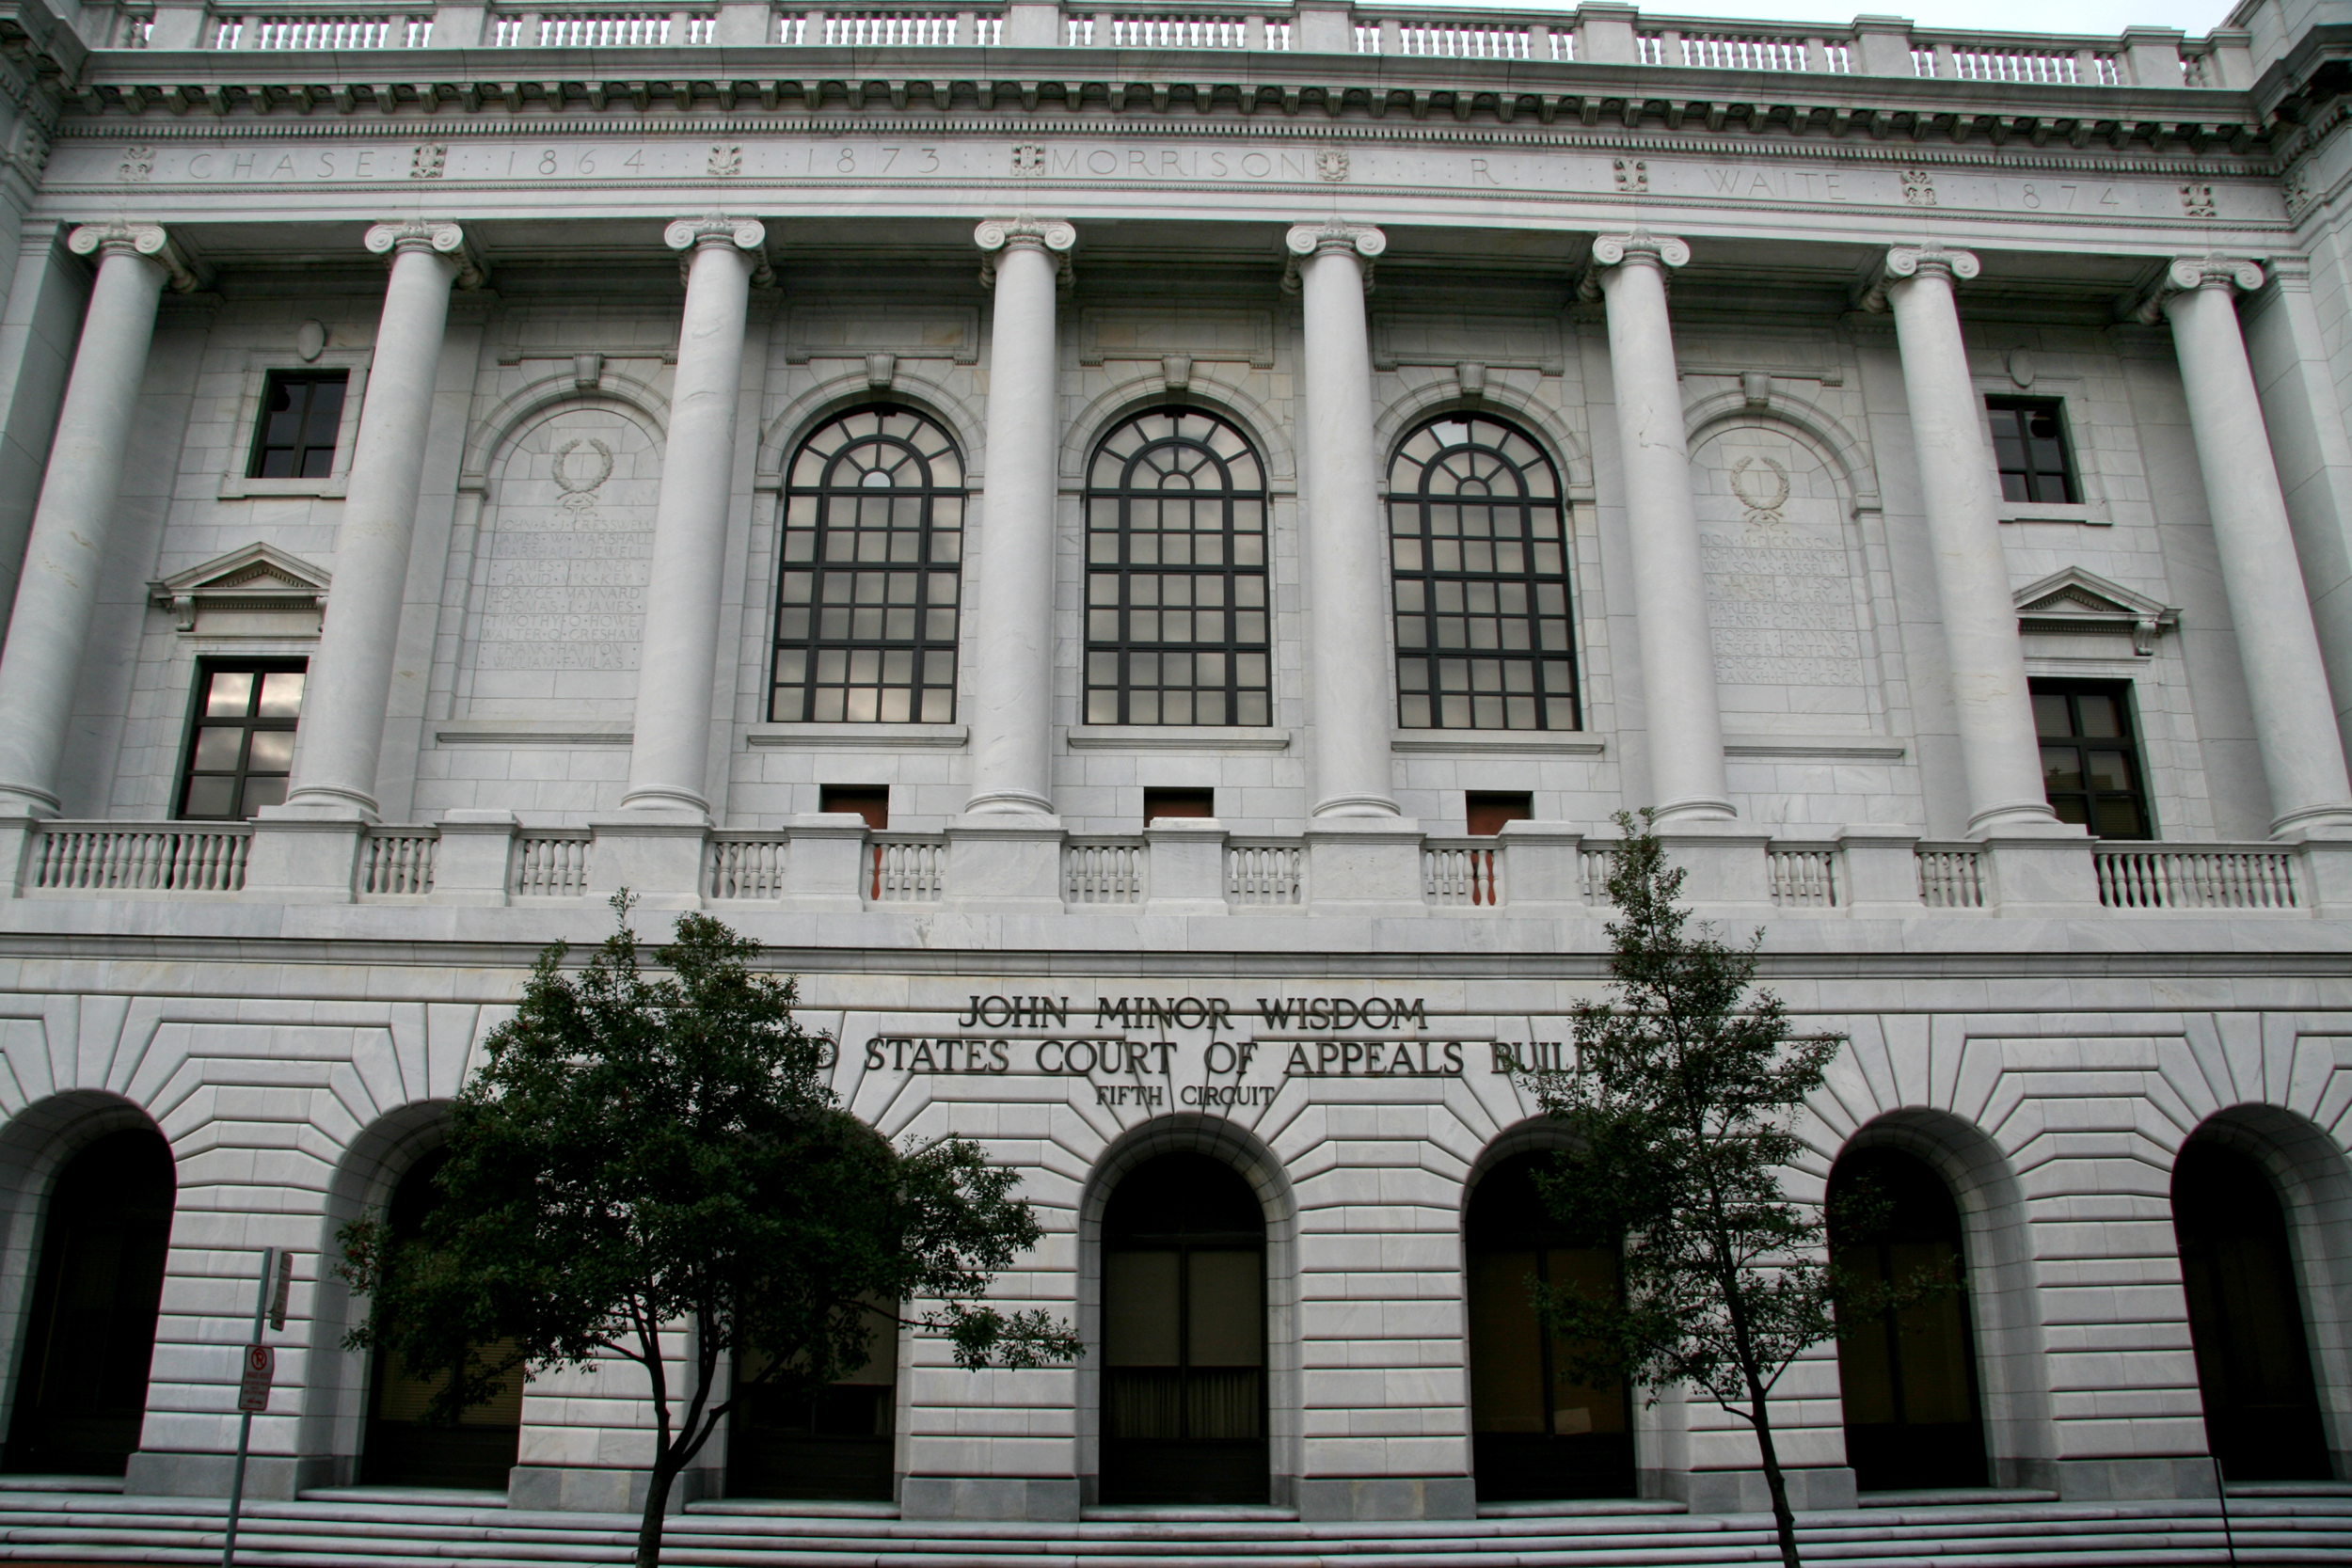 Fifth Circuit Courthouse